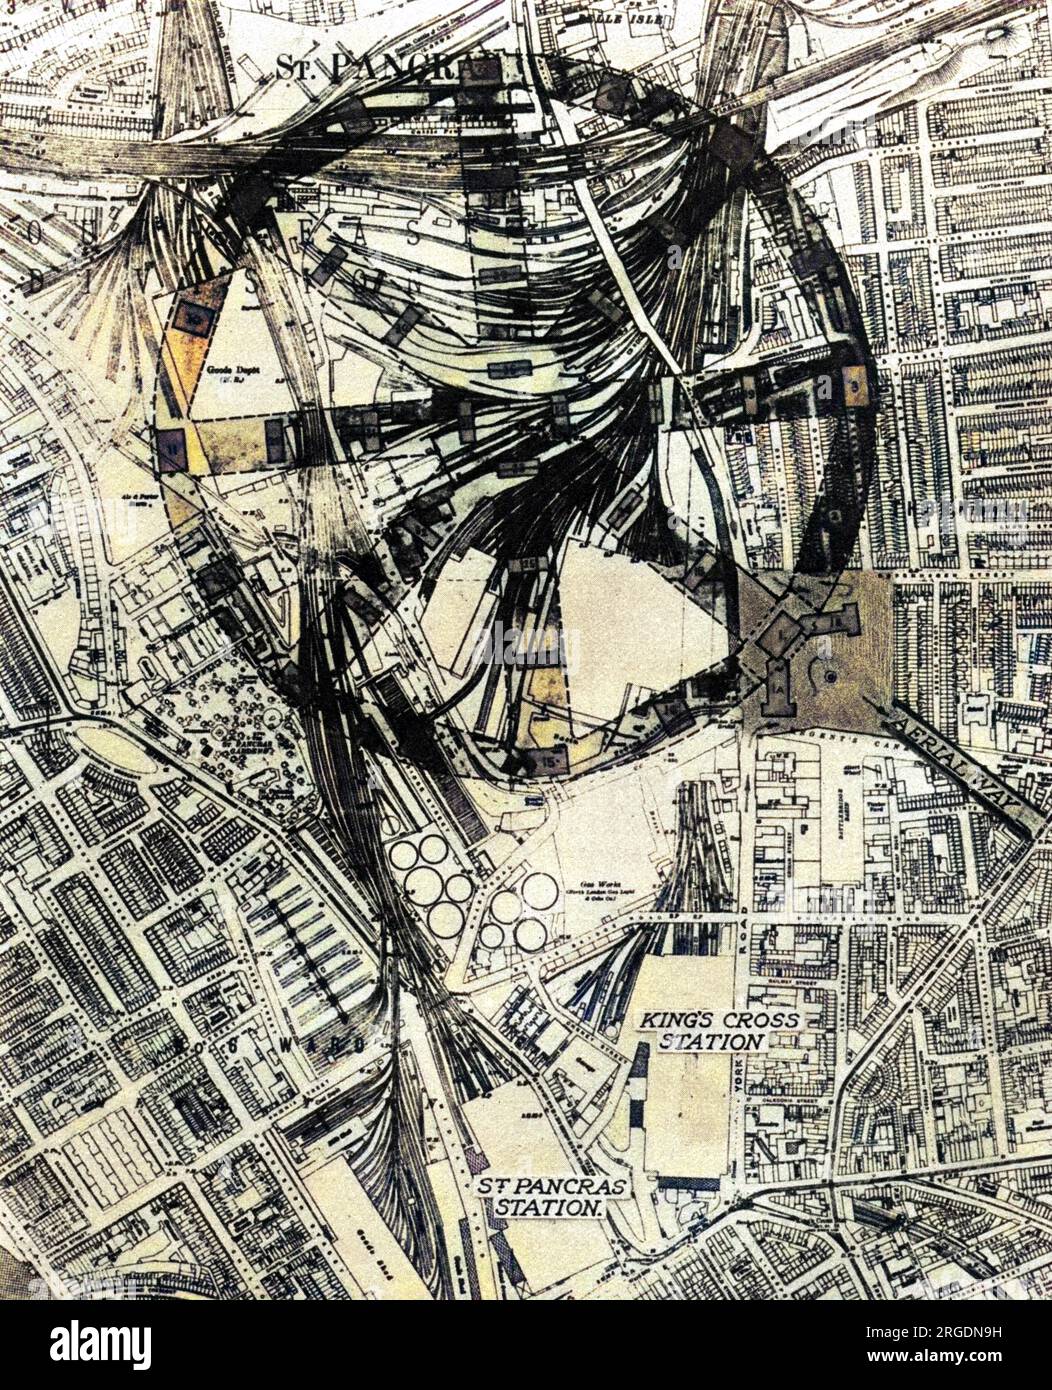 A suggested central London air terminus at Kings Cross, combined with a railway, road goods terminus and a large station for motor coaches and omnibuses. Aeroplanes can be seen landing on the runways of a huge wheel like structure in this impressionistic sketch. Stock Photo